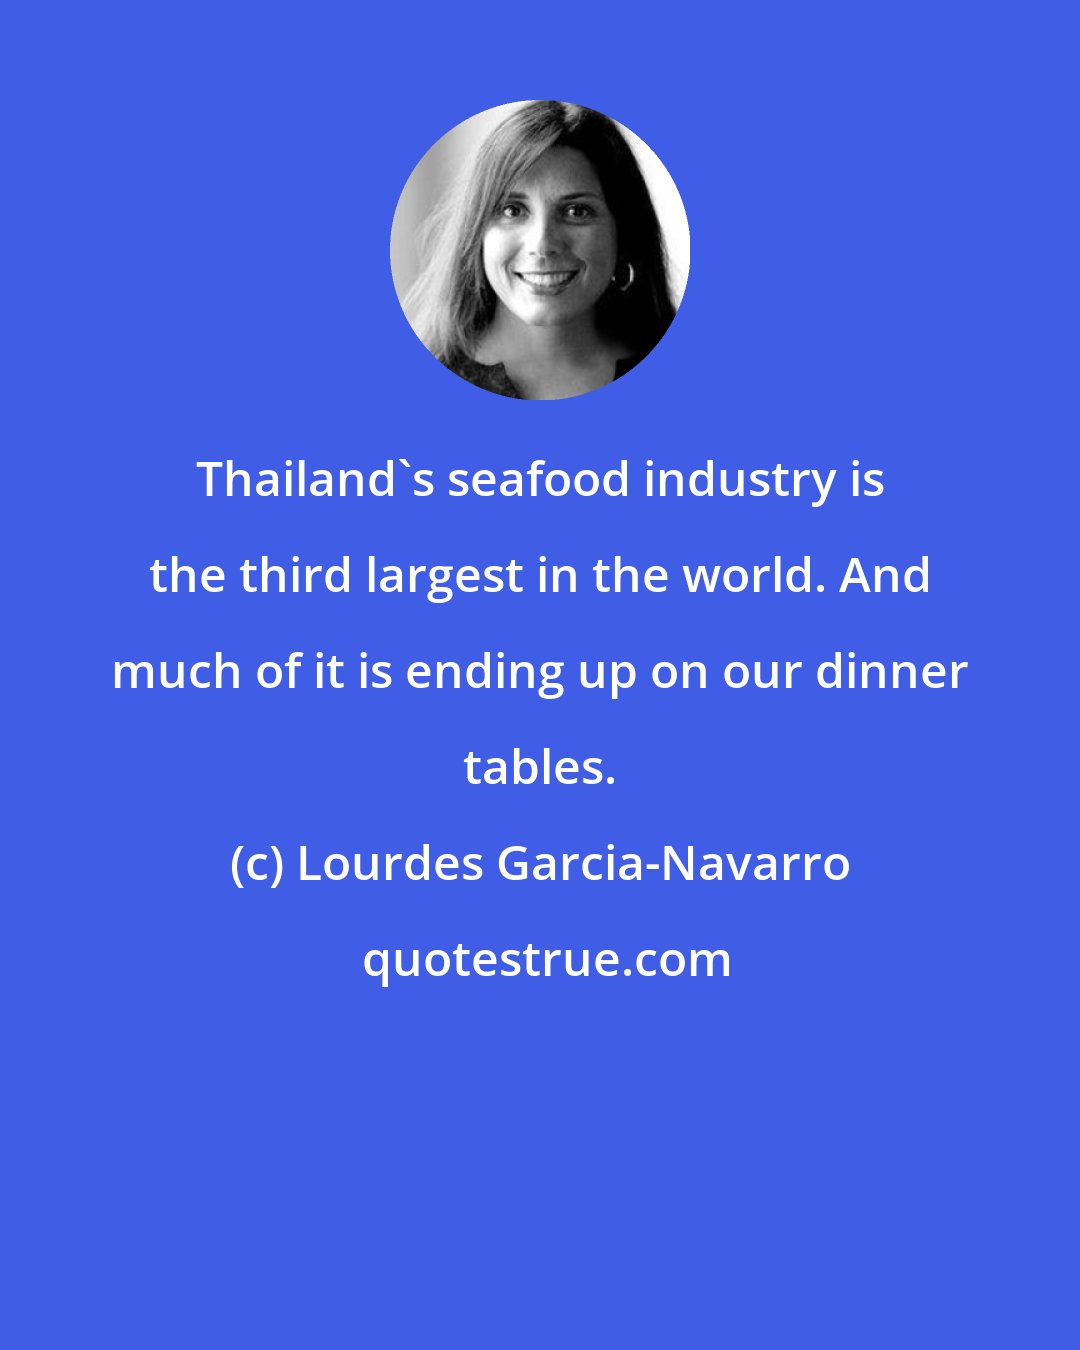 Lourdes Garcia-Navarro: Thailand's seafood industry is the third largest in the world. And much of it is ending up on our dinner tables.